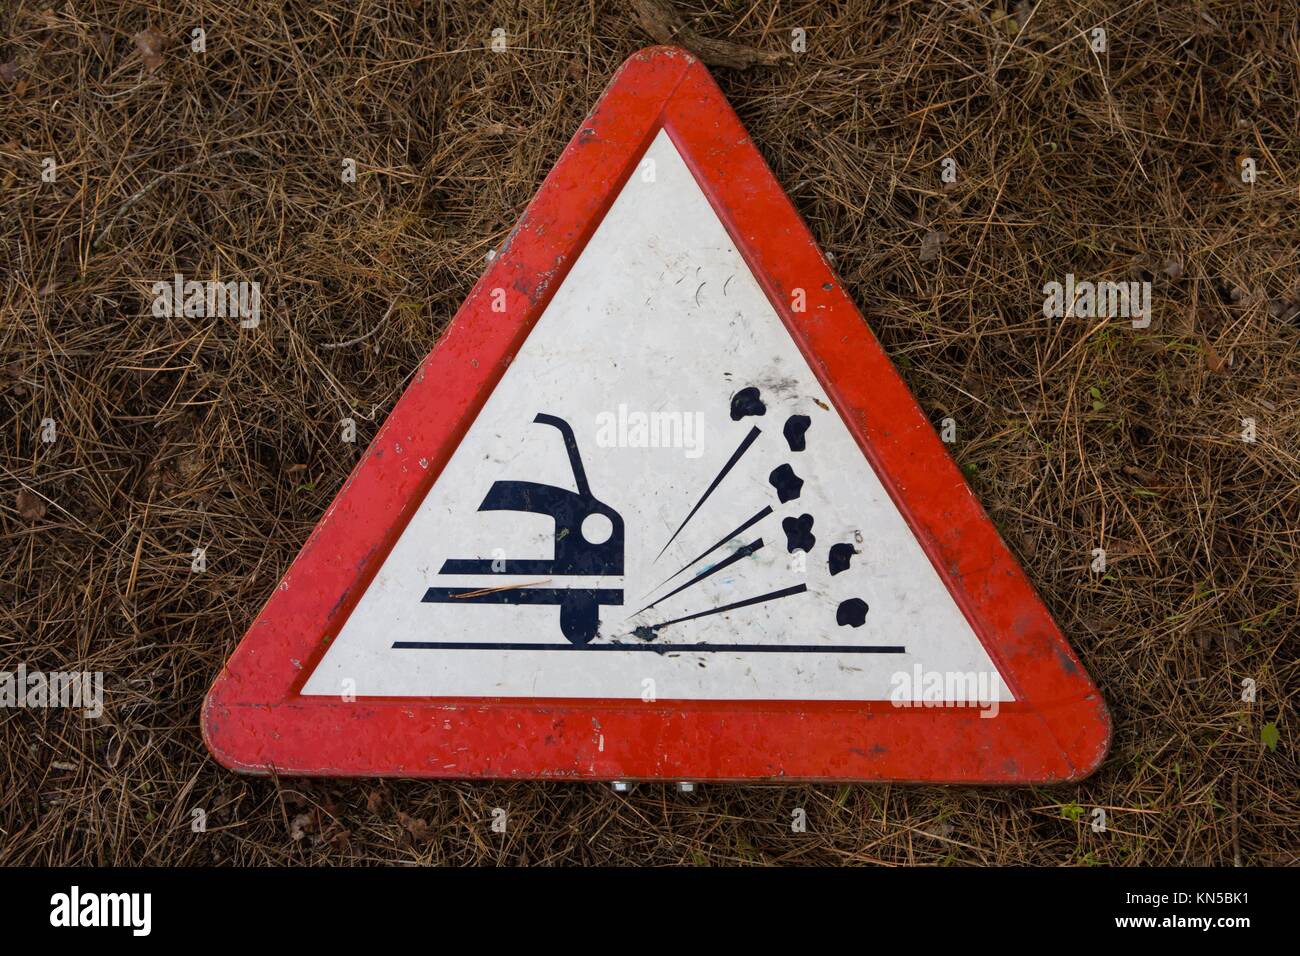 triangle traffic sign for gravel isolated over dry grassy background. Stock Photo